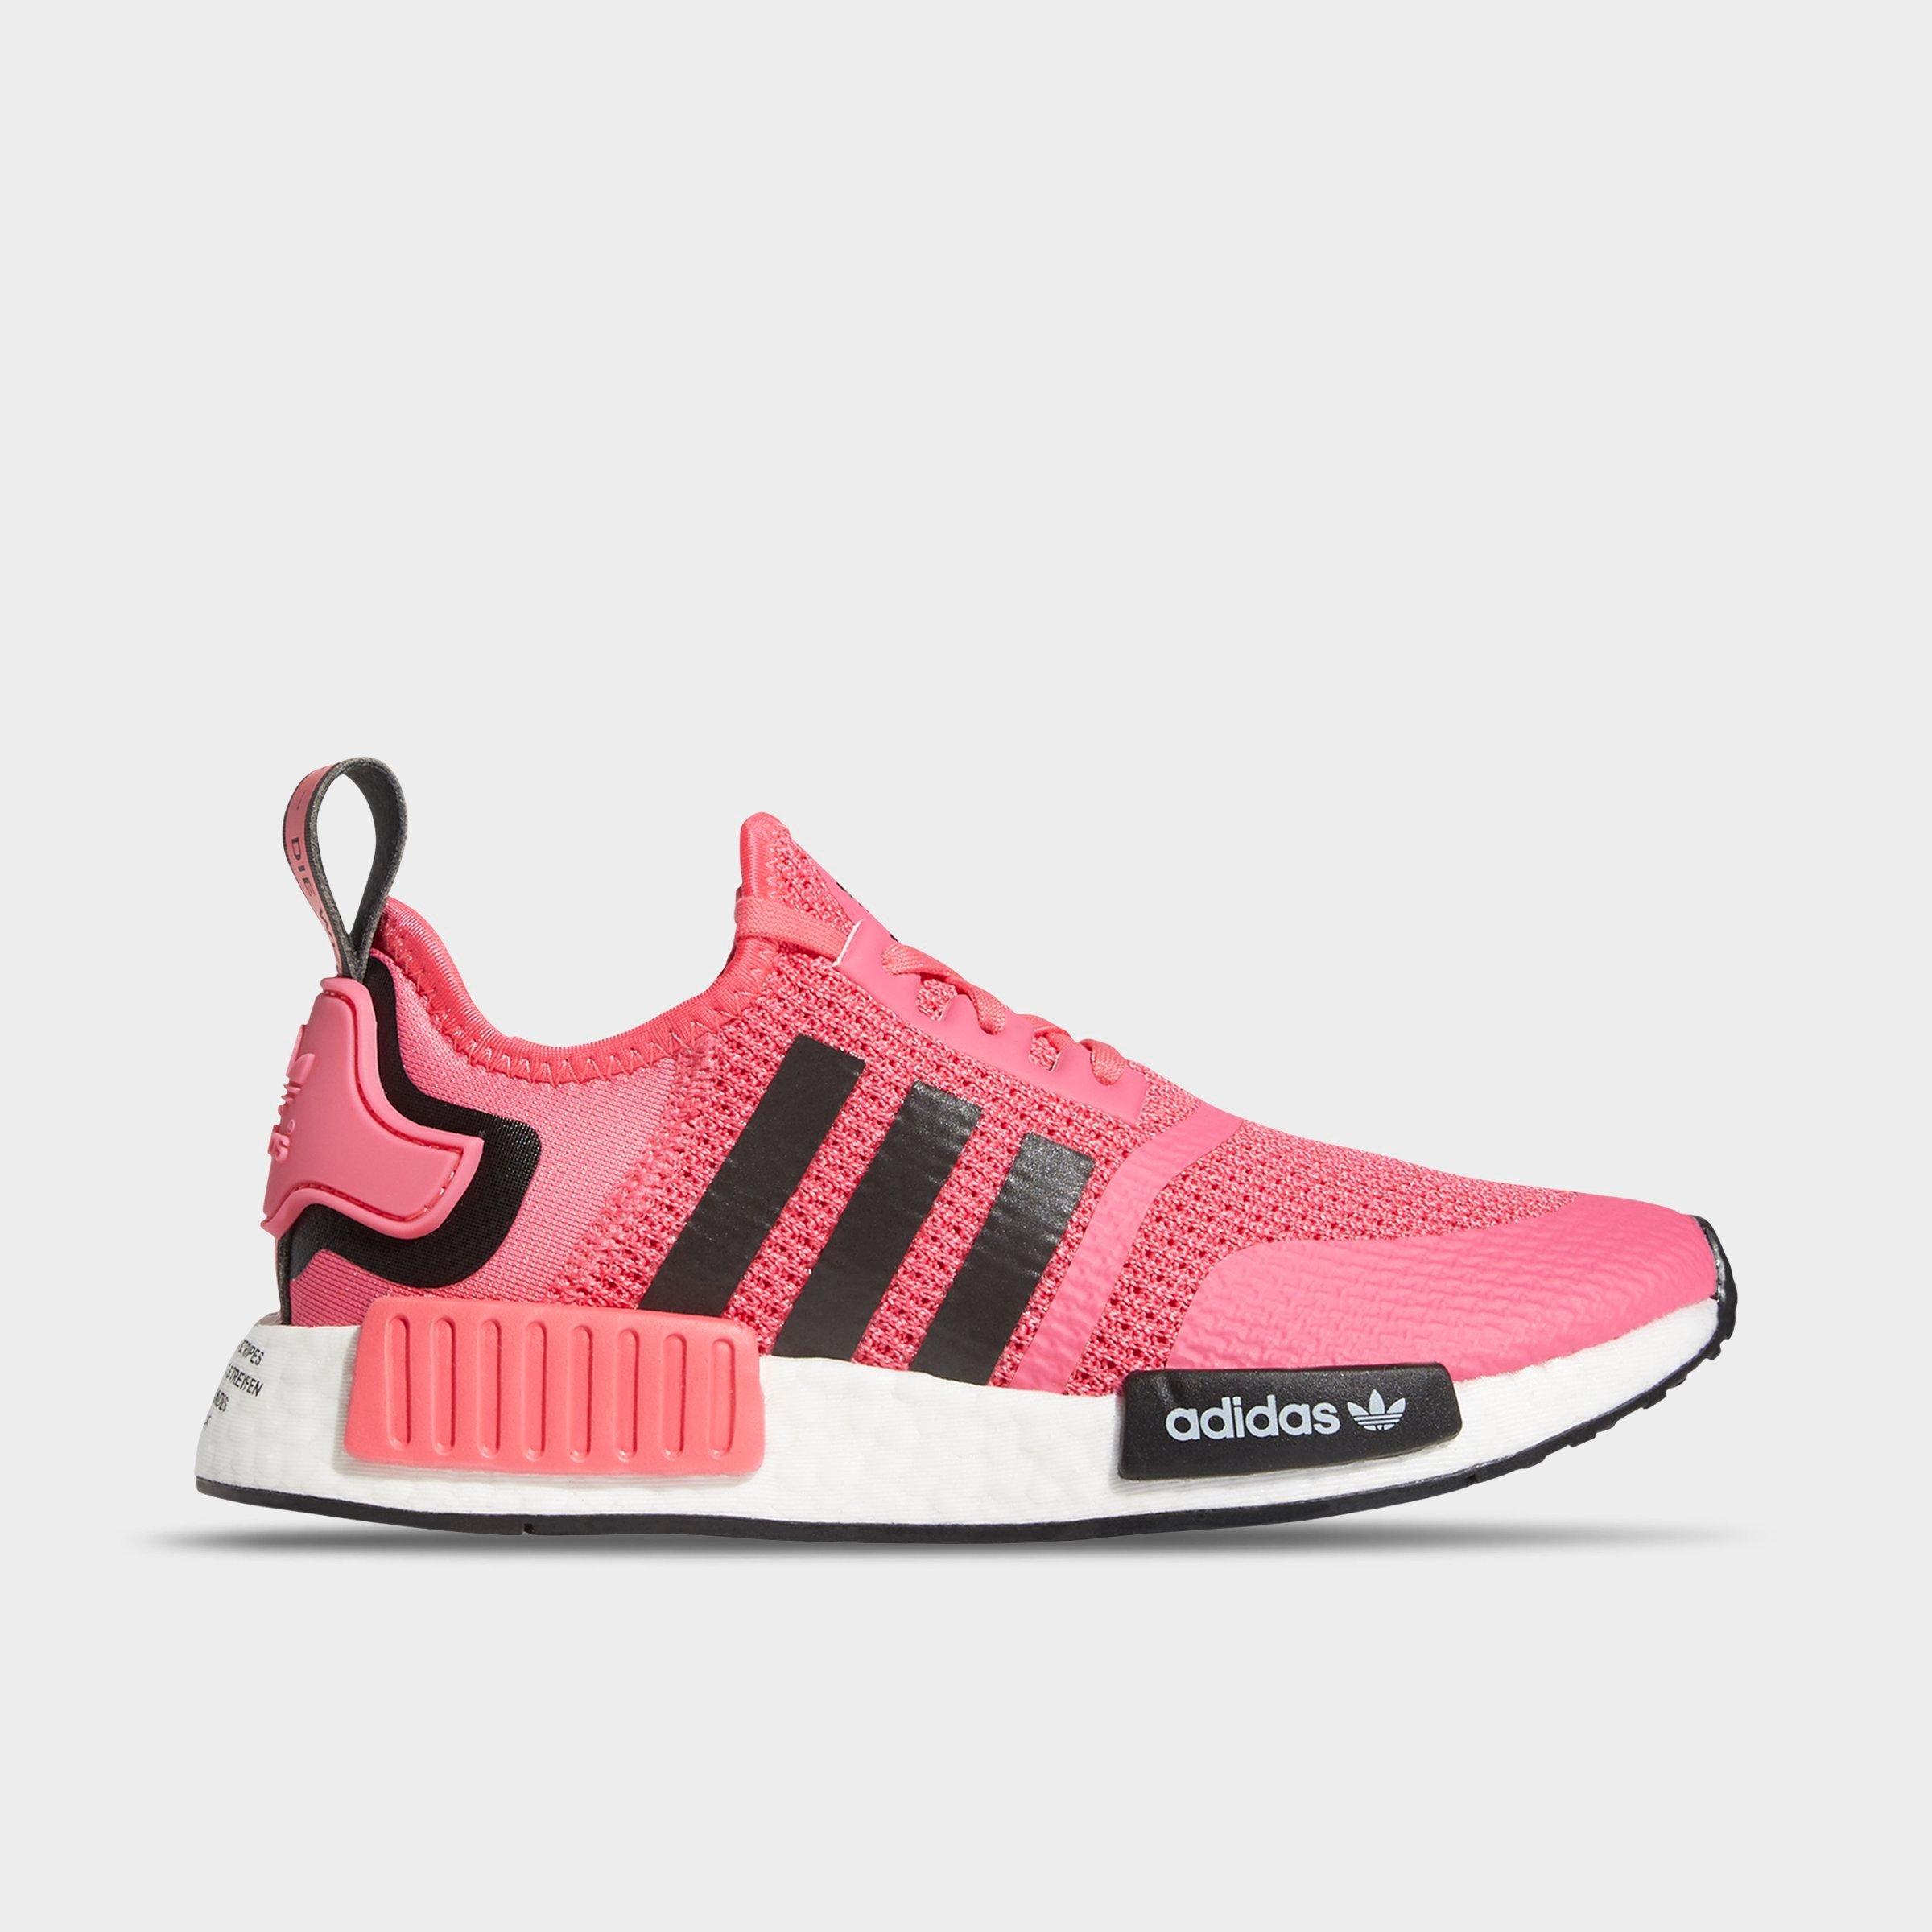 nmd size 2.5